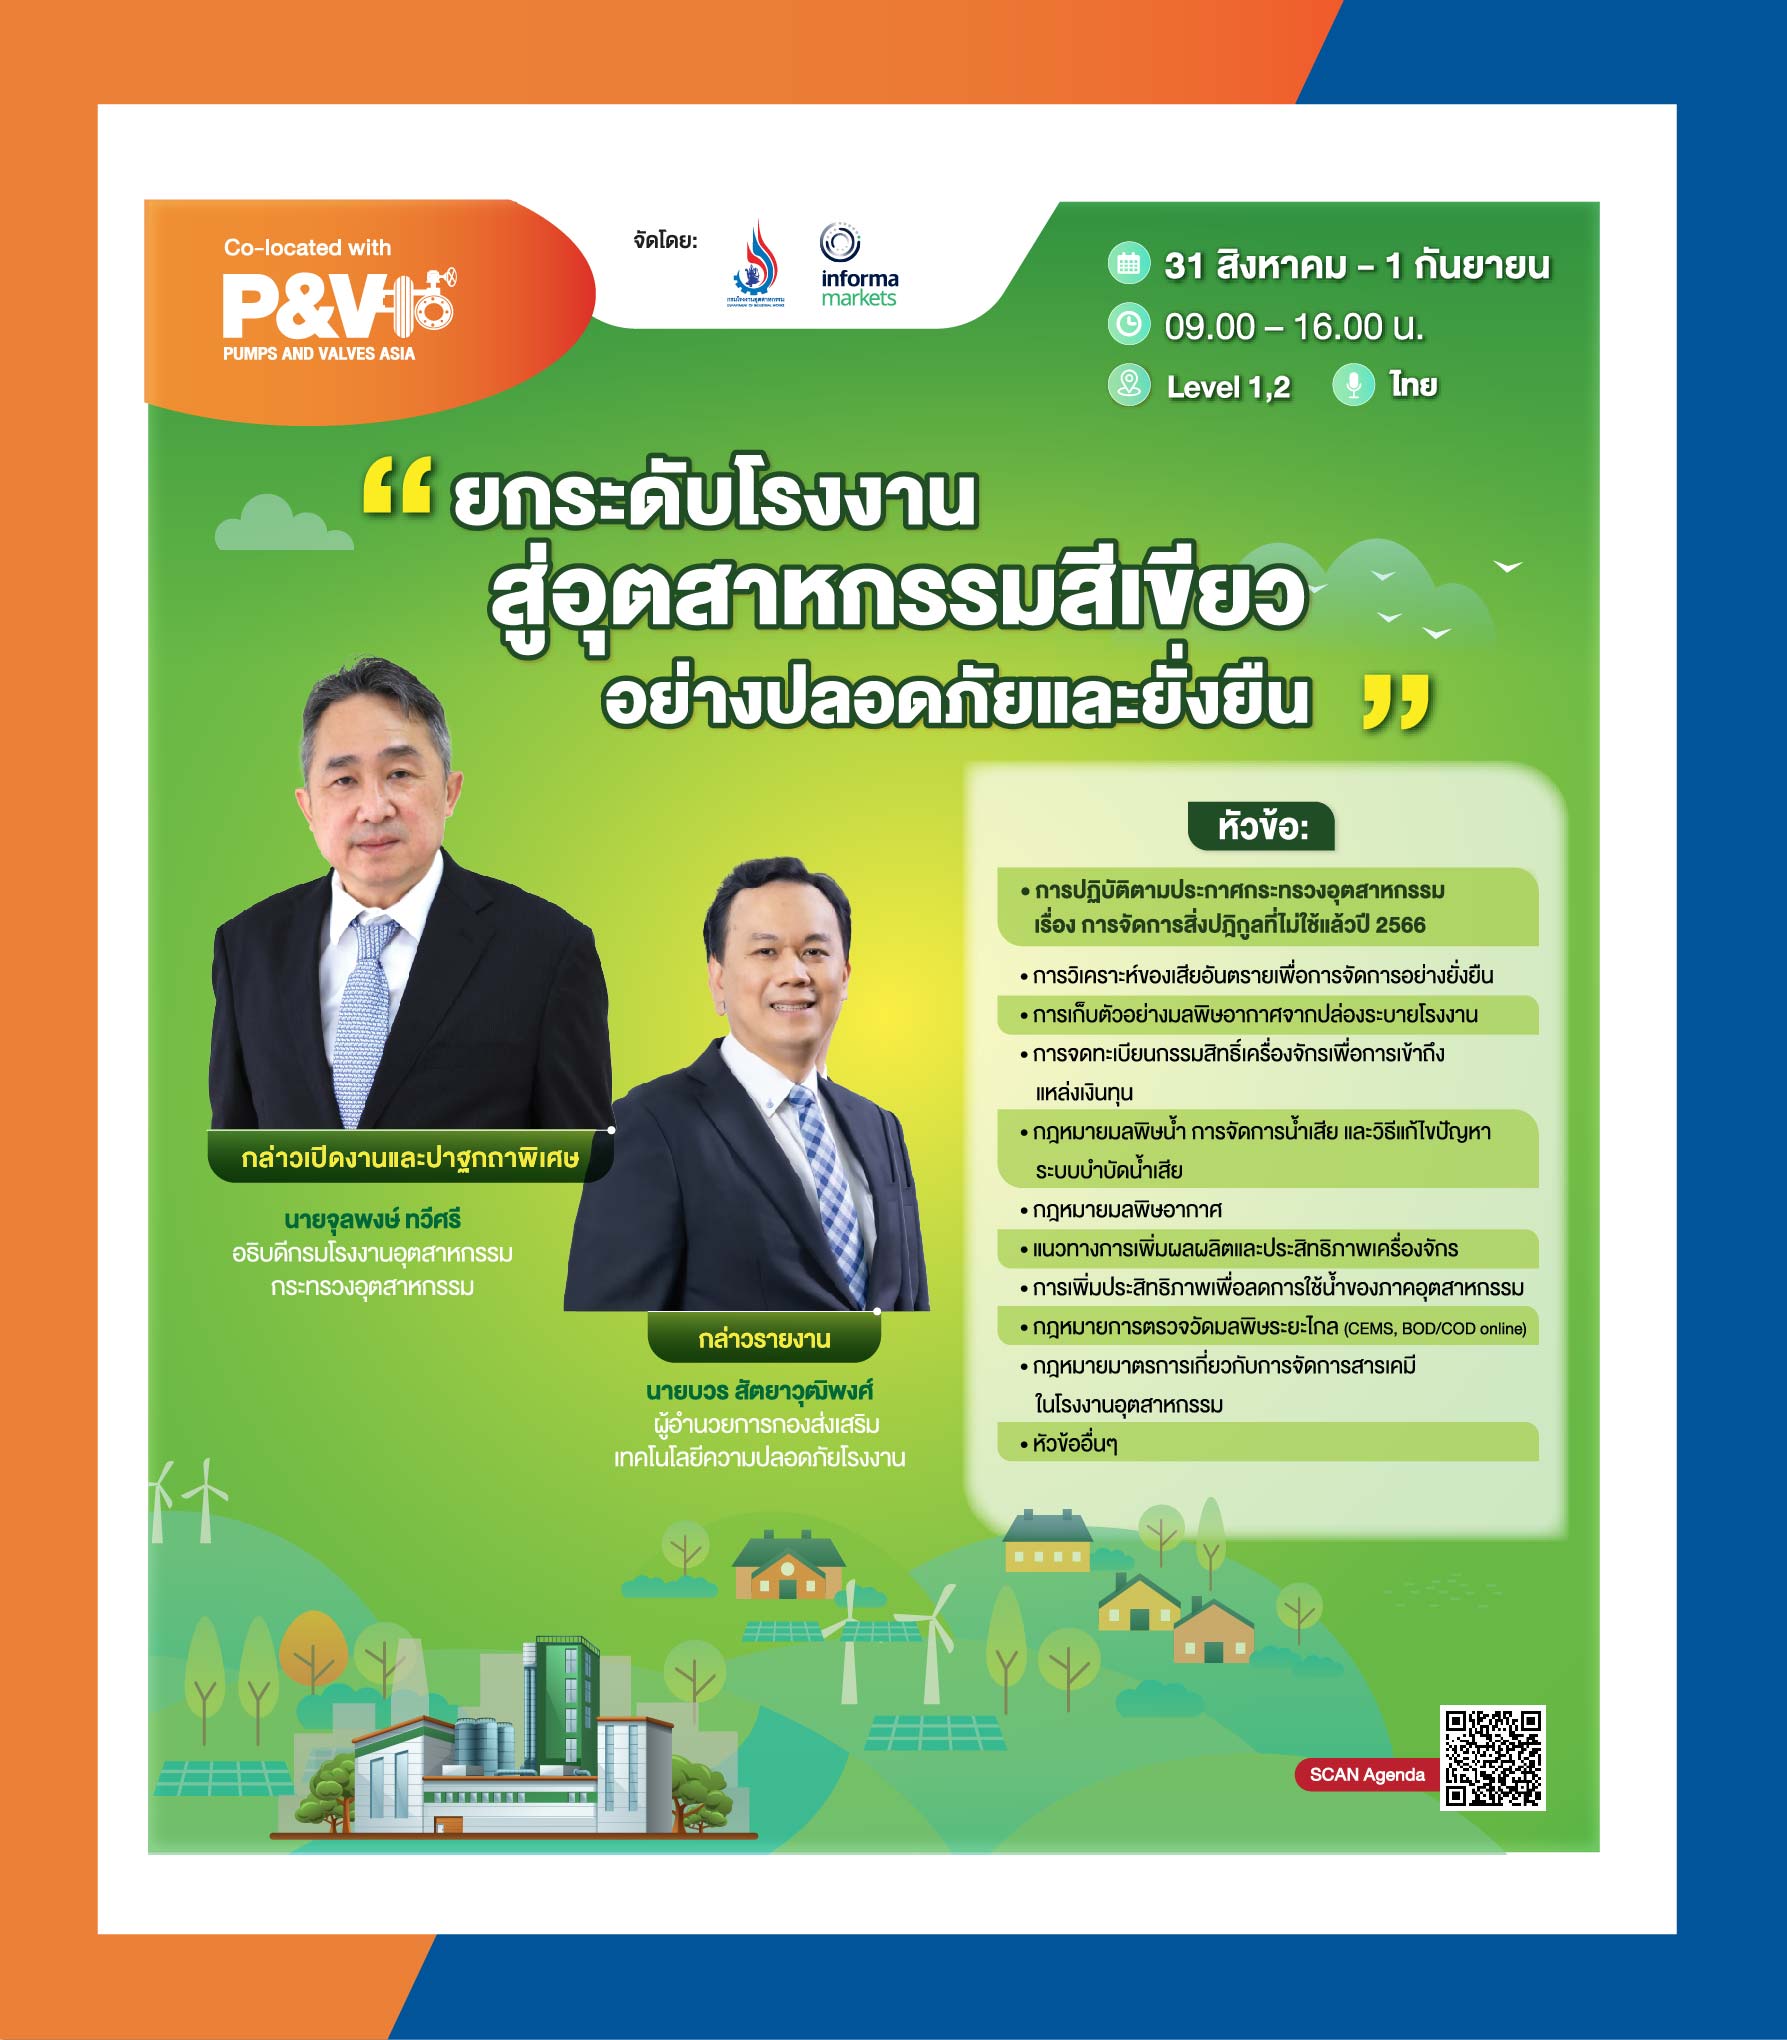 Department of Industrial Works Seminar on “Elevate the Factory for Green Industry safely and sustainably.” 